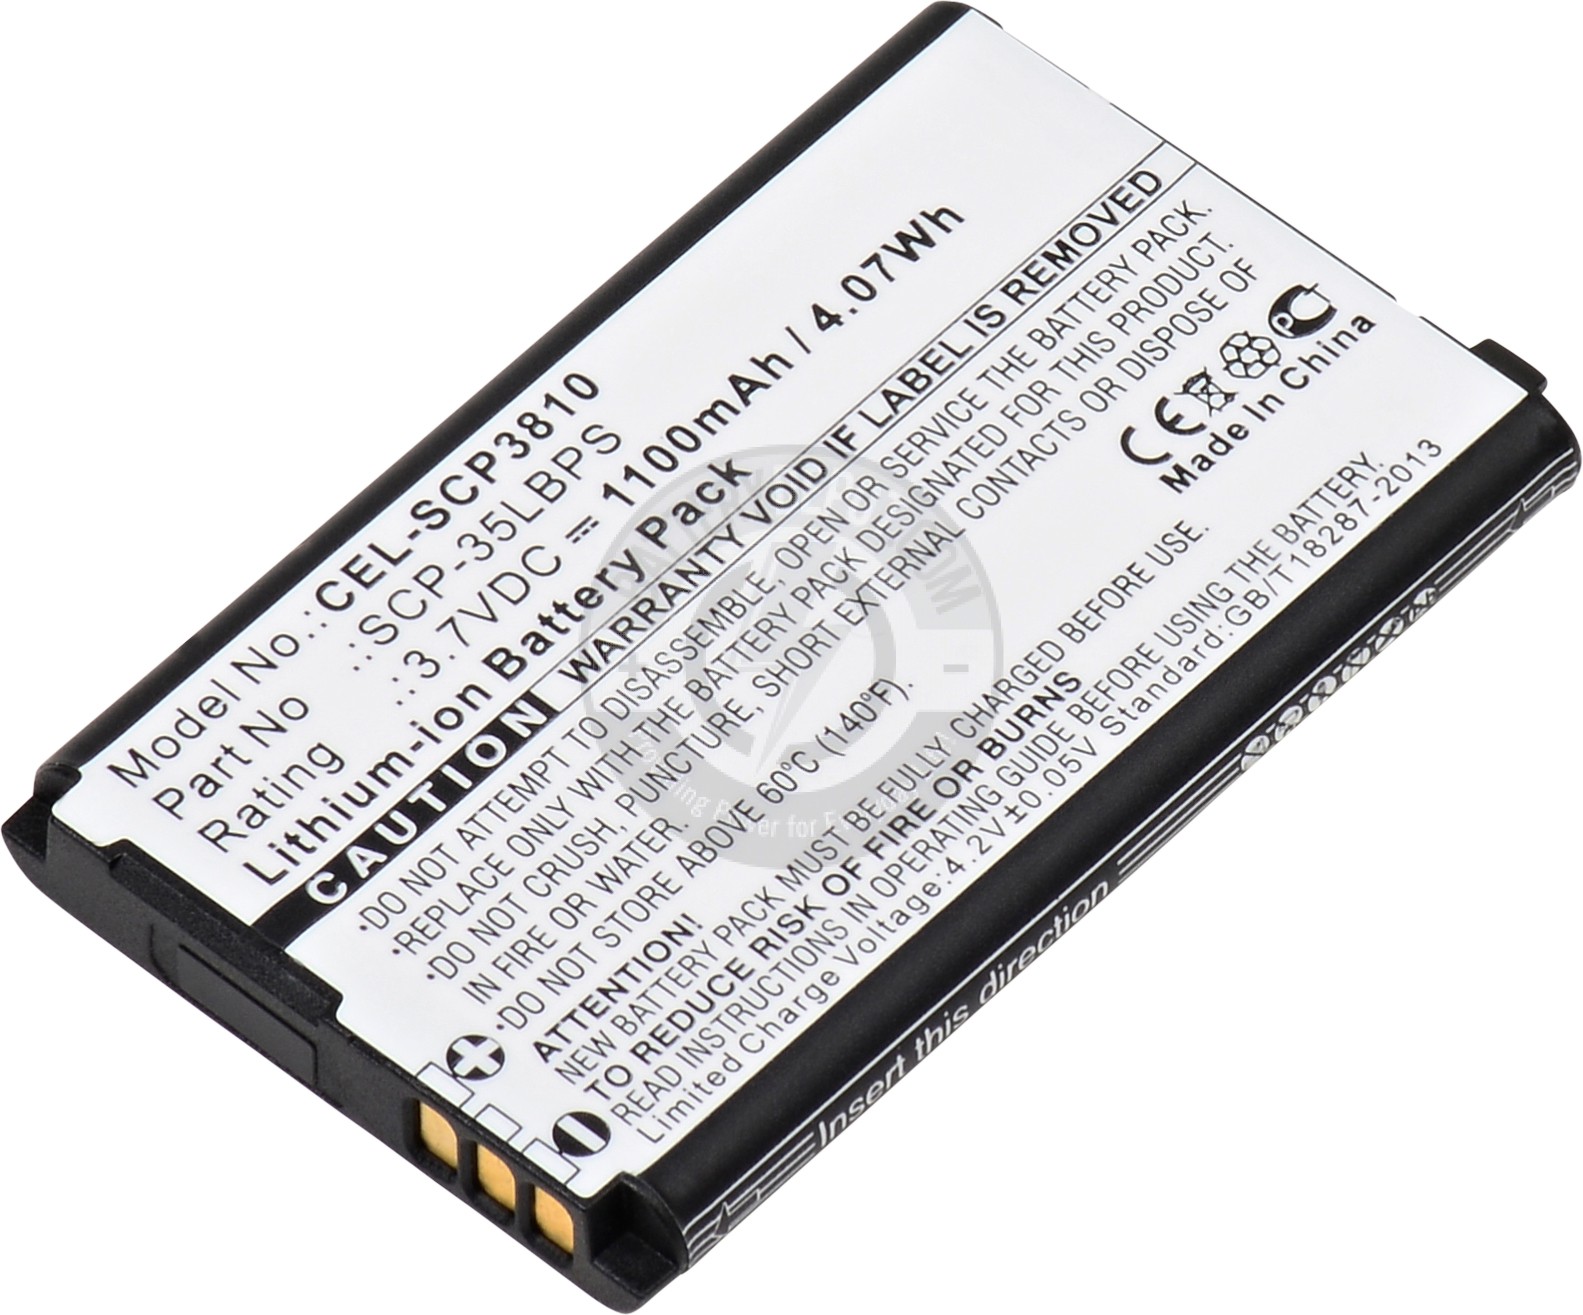 Cell phone battery for Sanyo